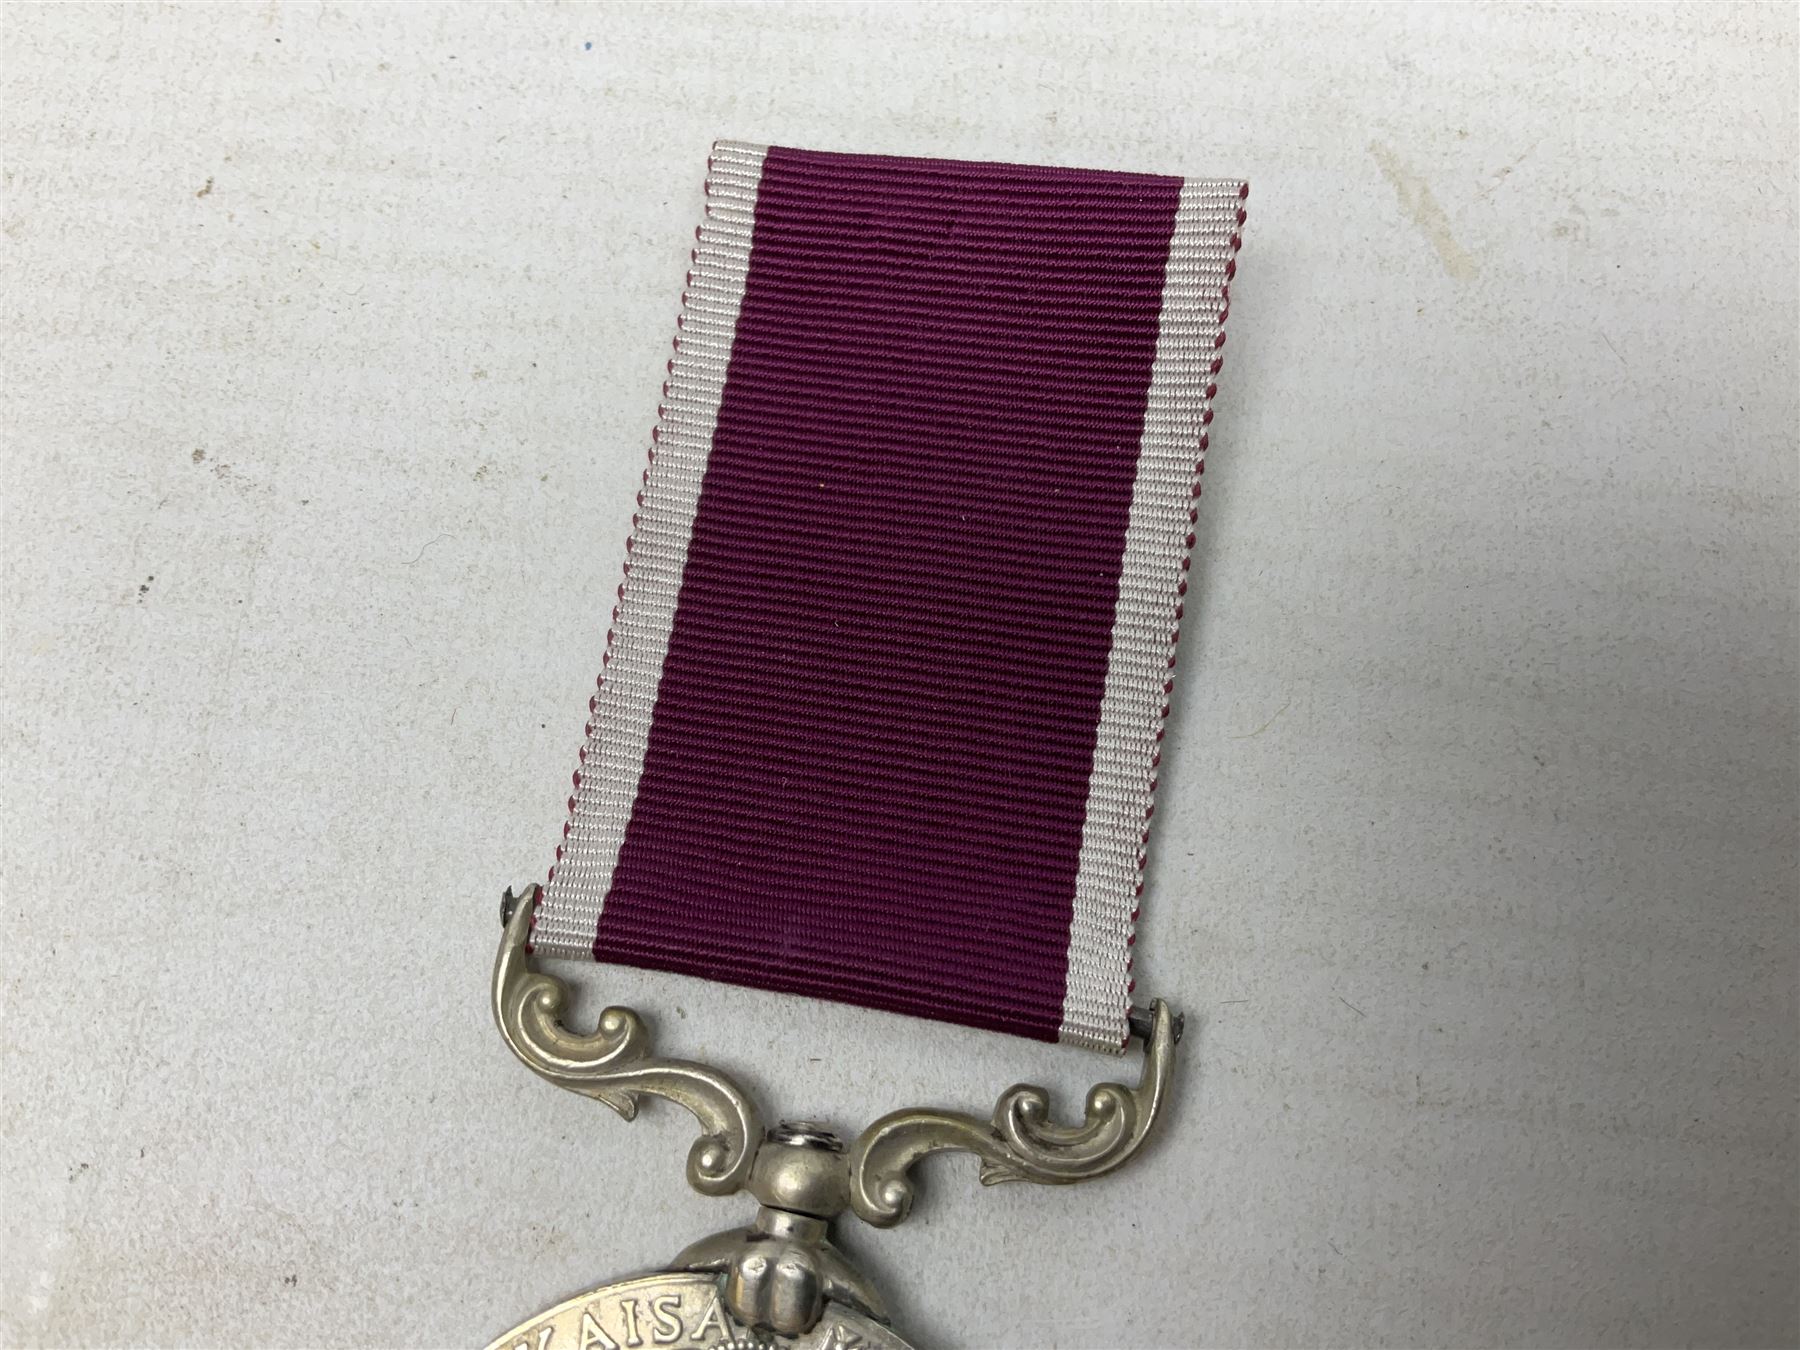 George V India Long Service and Good Conduct Medal awarded to T.B.-41020 Nk. Ausnake Ram - Image 4 of 8